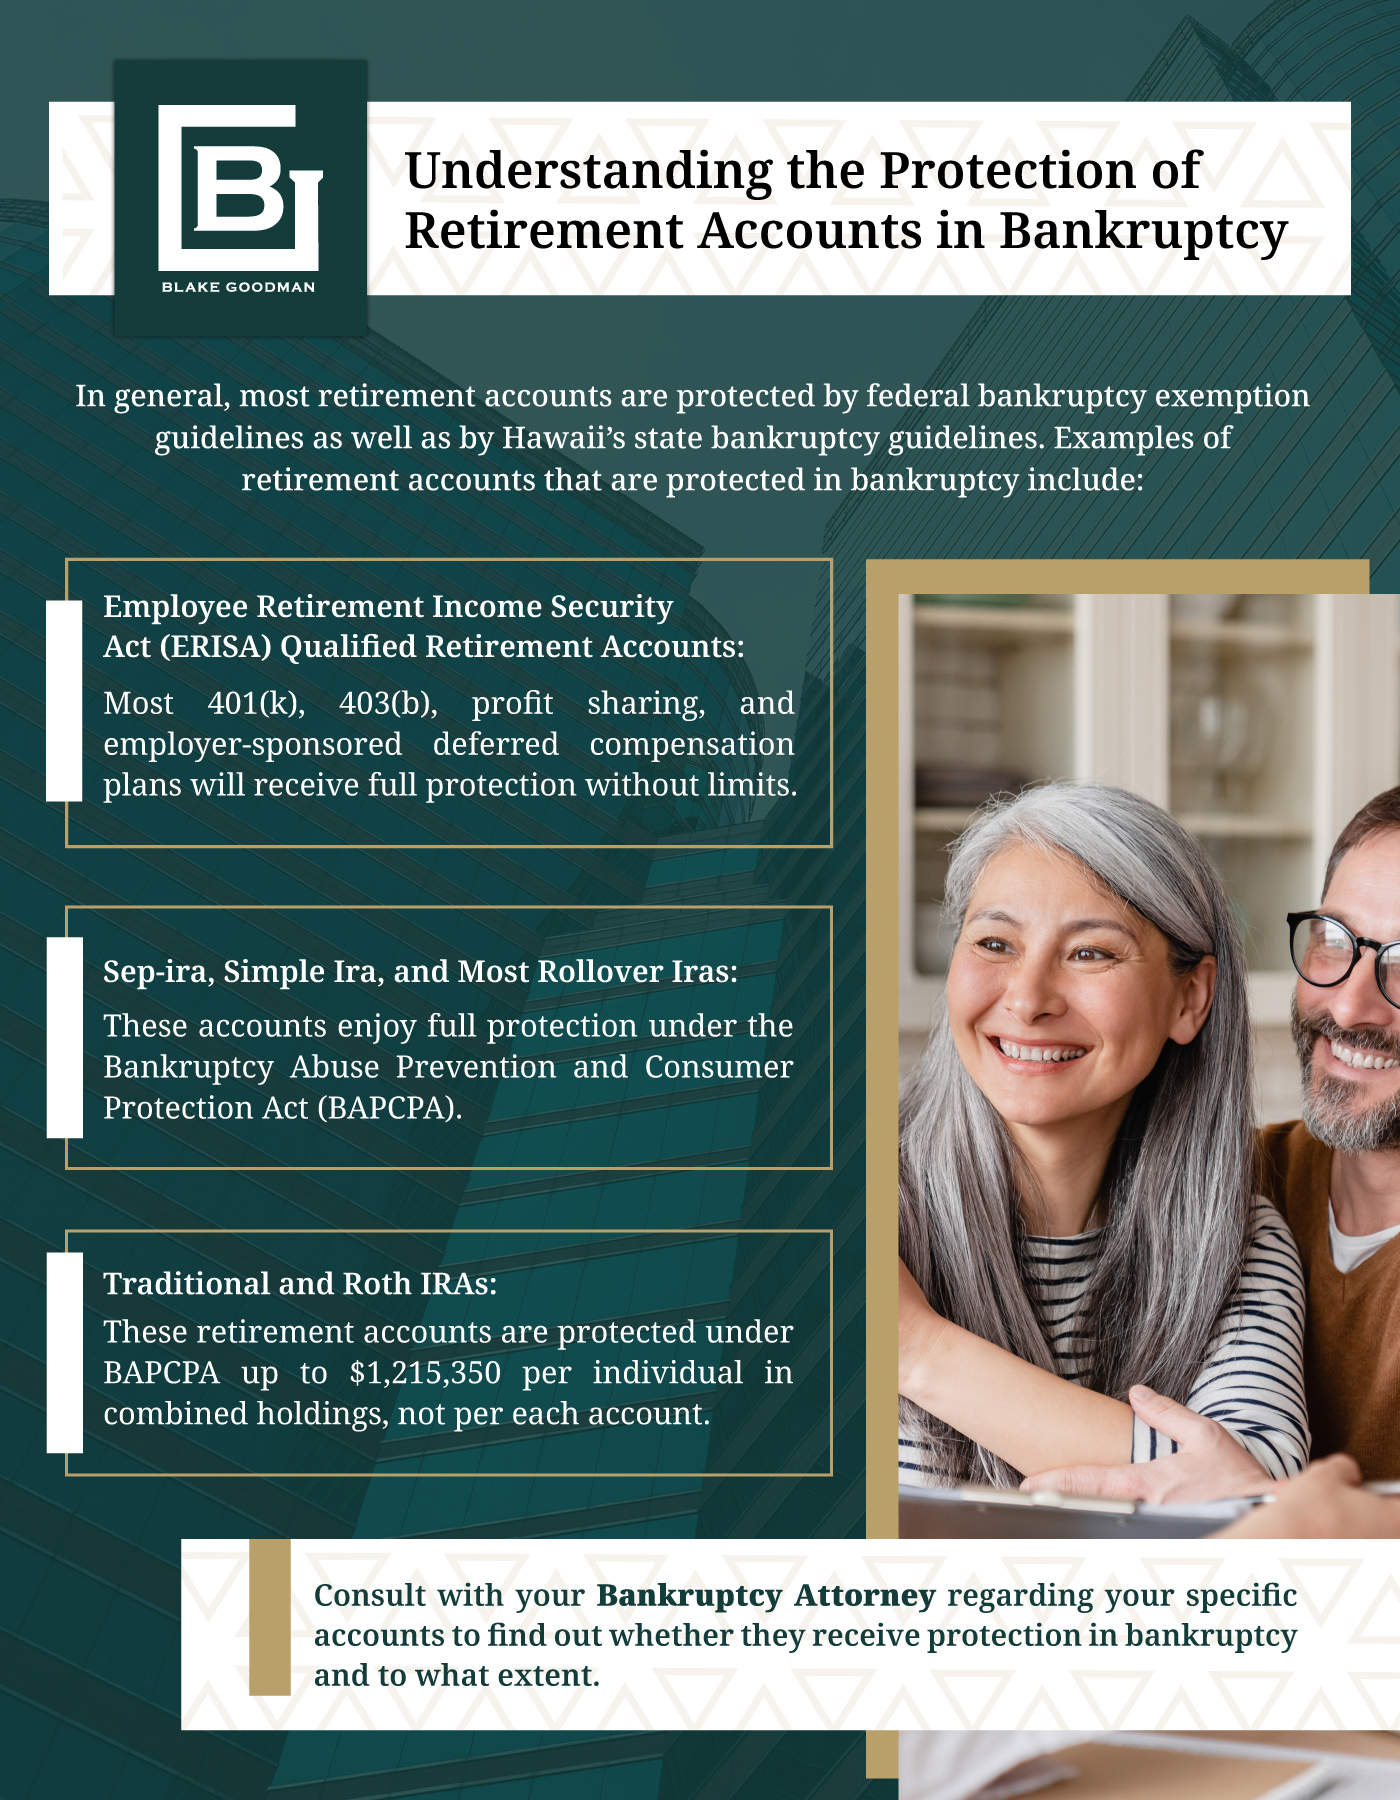 An infographic that shows which retirement accounts are protected in bankruptcy